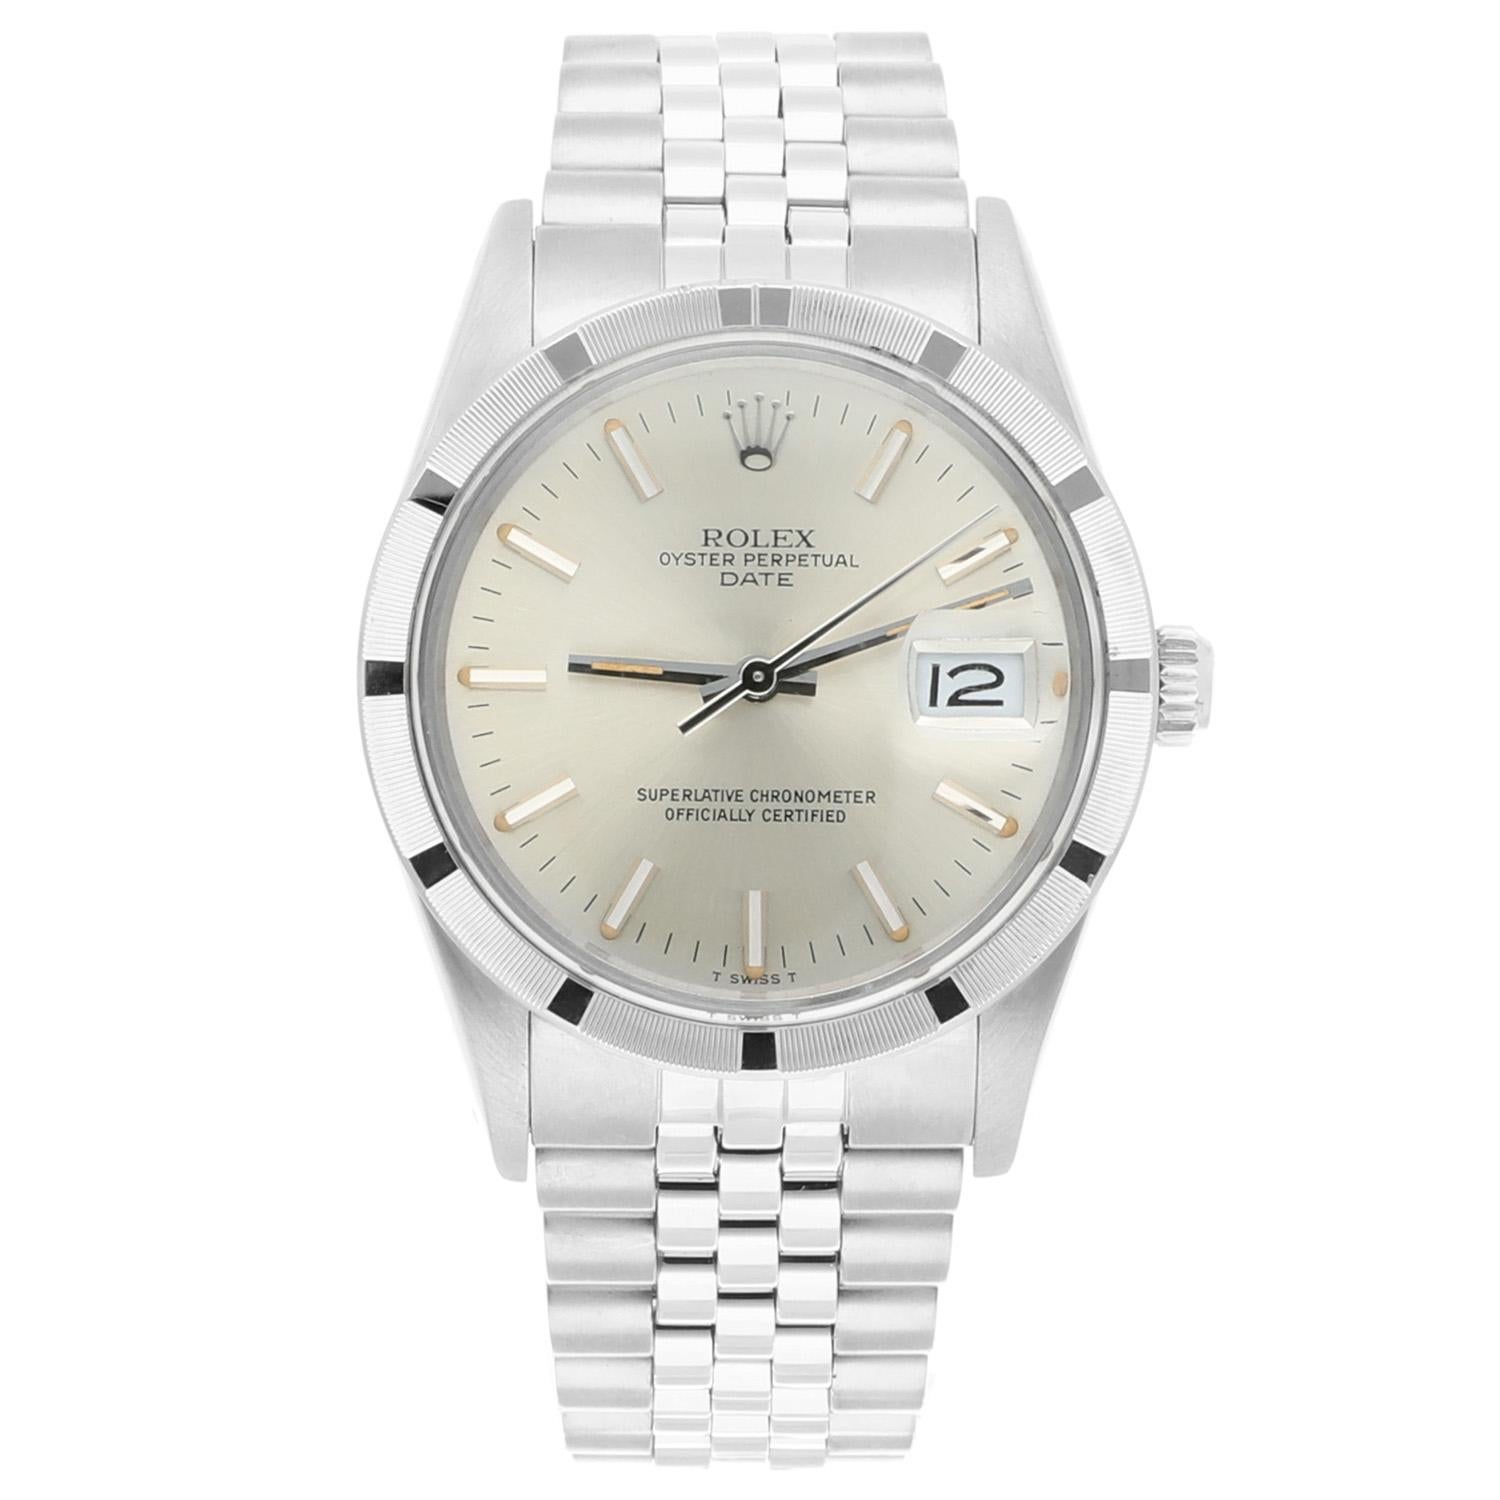 Unisex Rolex Date Stainless Steel Watch Jubilee Silver Index Dial 15010 Circa 1983

This watch has been professionally polished, serviced and is in excellent overall condition. There are absolutely no visible scratches or blemishes. Authenticity